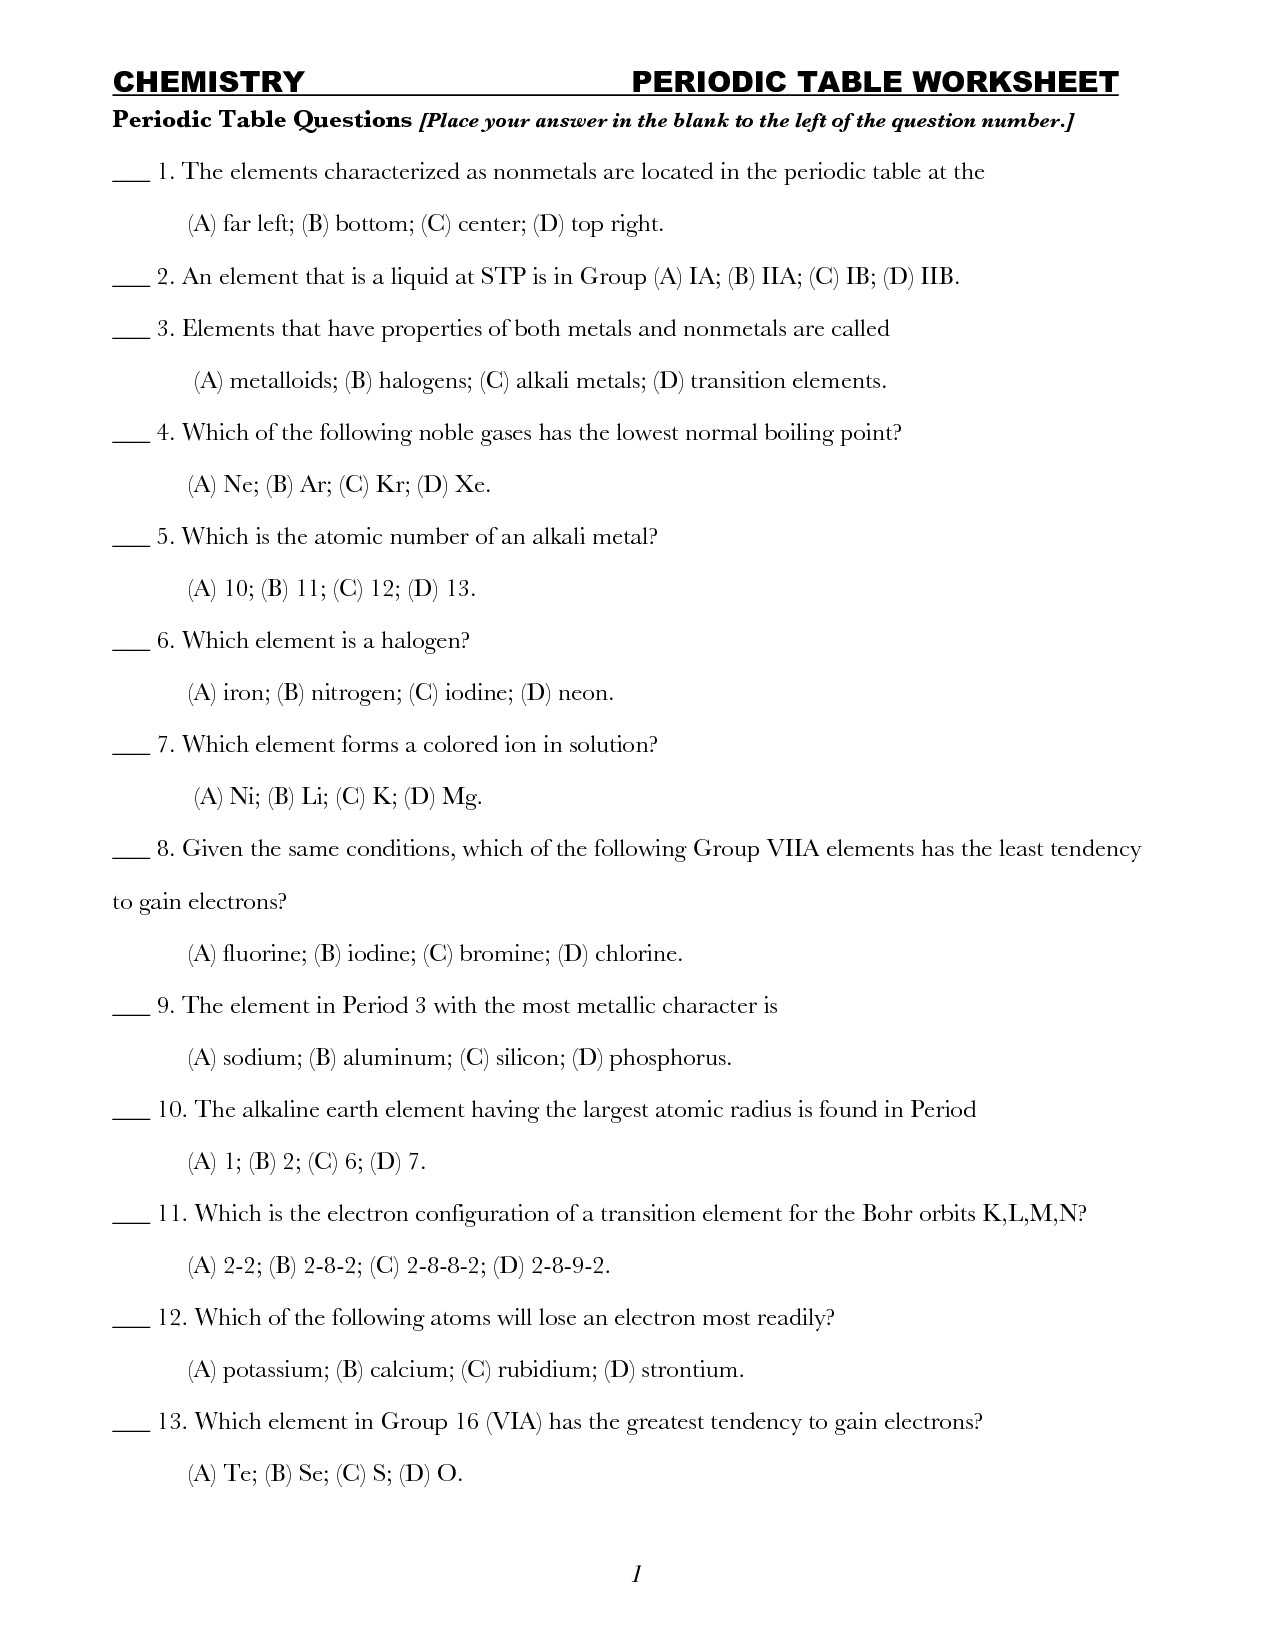 Scavenger Hunt Worksheet Along with Periodic Table Elements Scavenger Hunt Valid Periodic Table